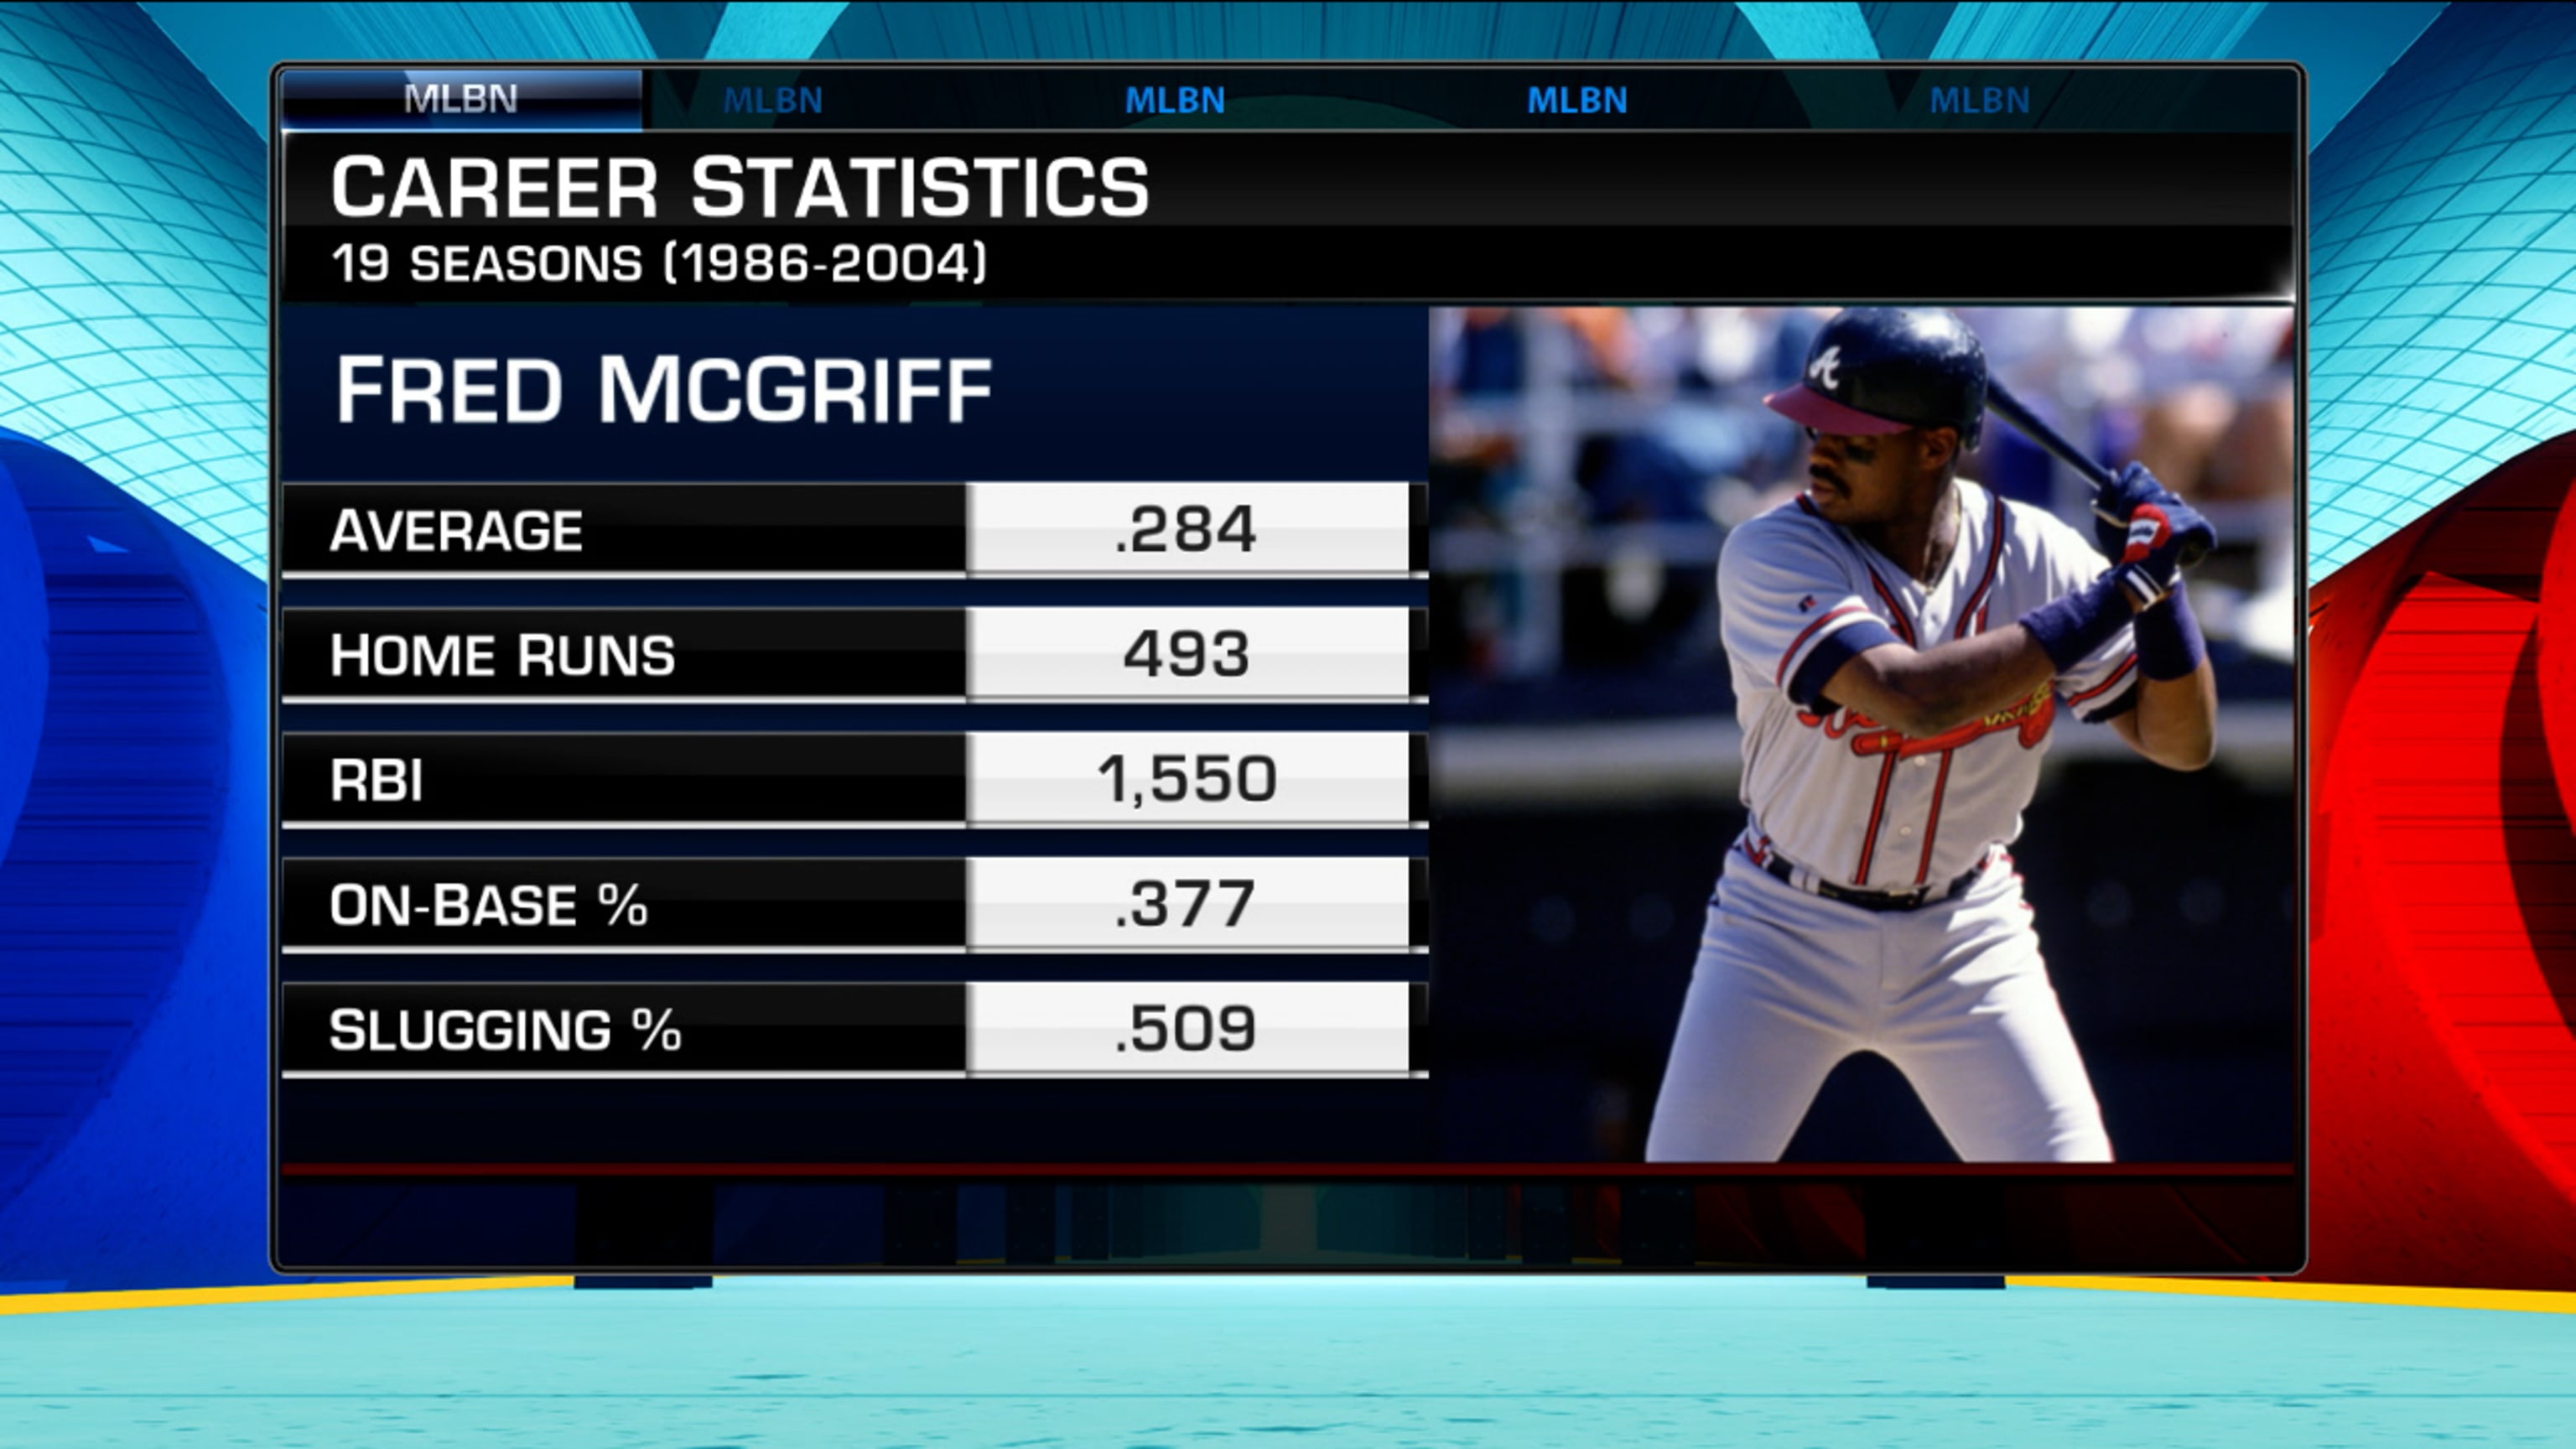 FULL SPEECH: Fred McGriff is immortalized in Cooperstown! 